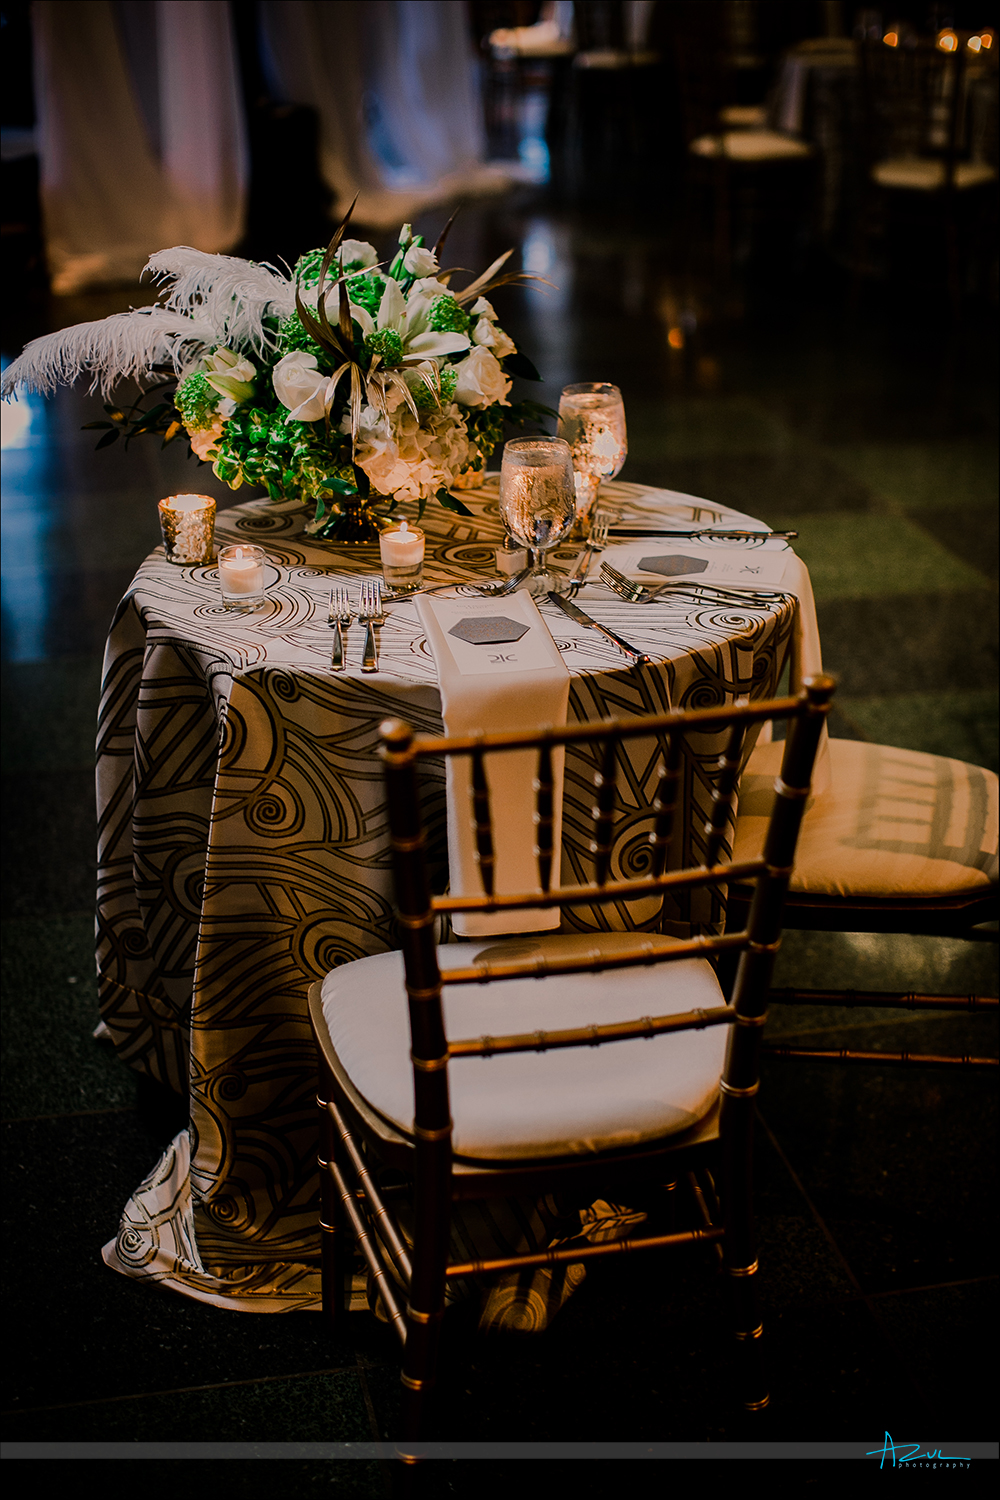 Wedding day sweetheart table for Rose and Christophe in Durham NC at 21c Museum & Hotel